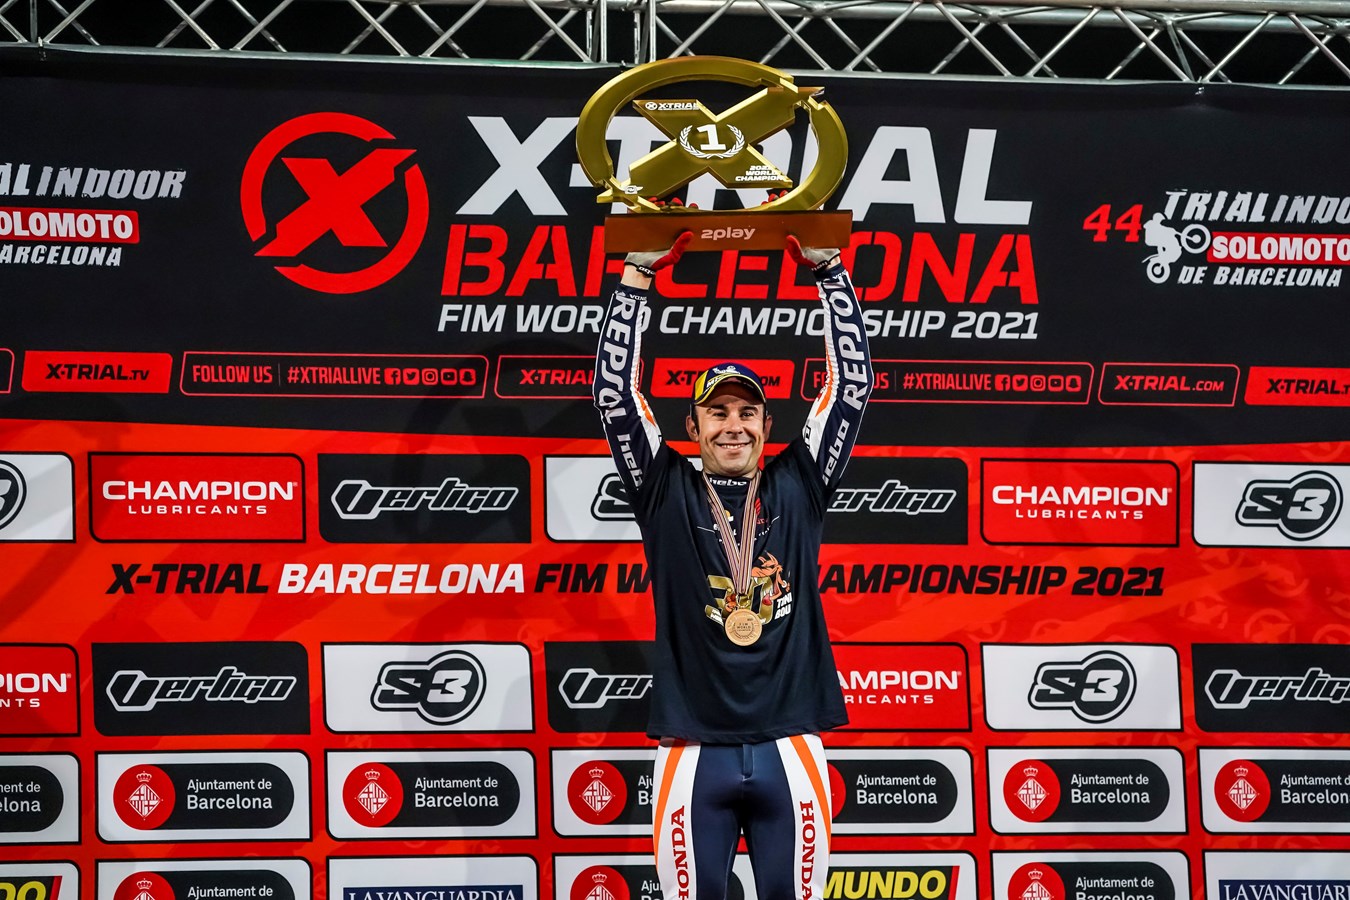 Toni Bou conquers a 30th world title in Barcelona